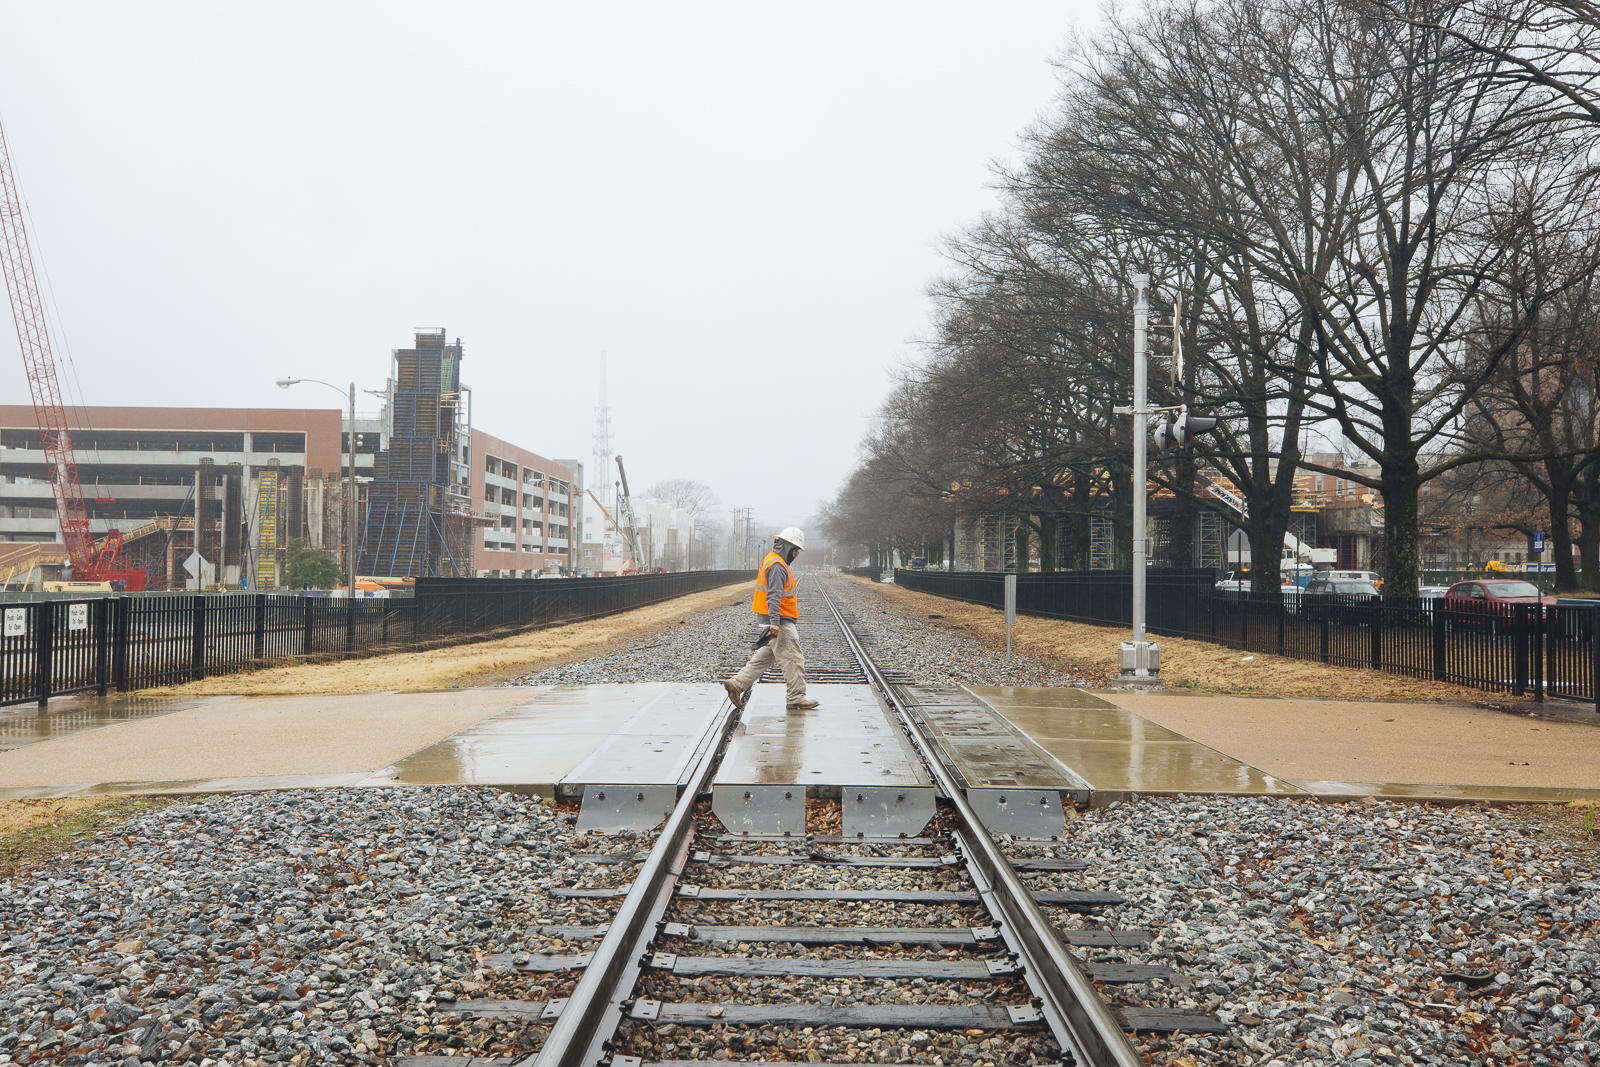 A construction worker walks across the Southern Avenue tracks near the University of Memphis campus at the heart of the University District. (Ziggy Mack)